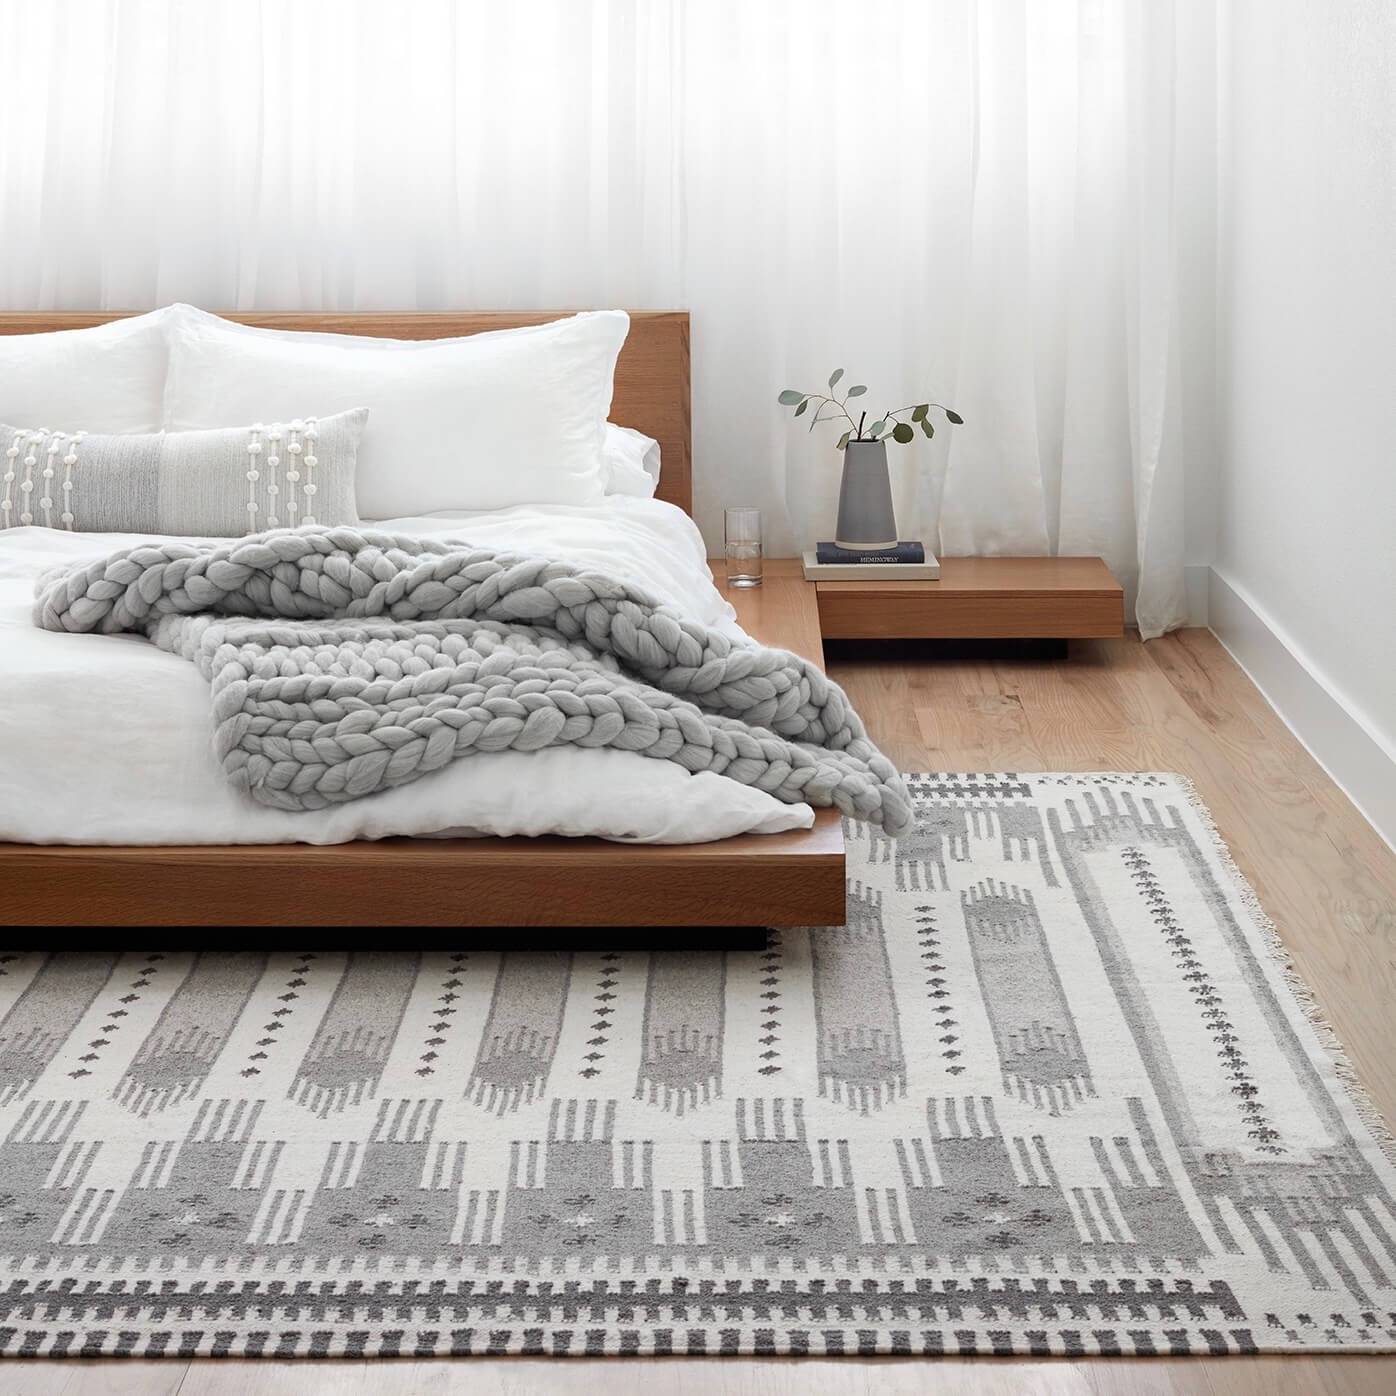 The Citizenry Asha Handwoven Area Rug | 5' x 8' | Grey - Image 2